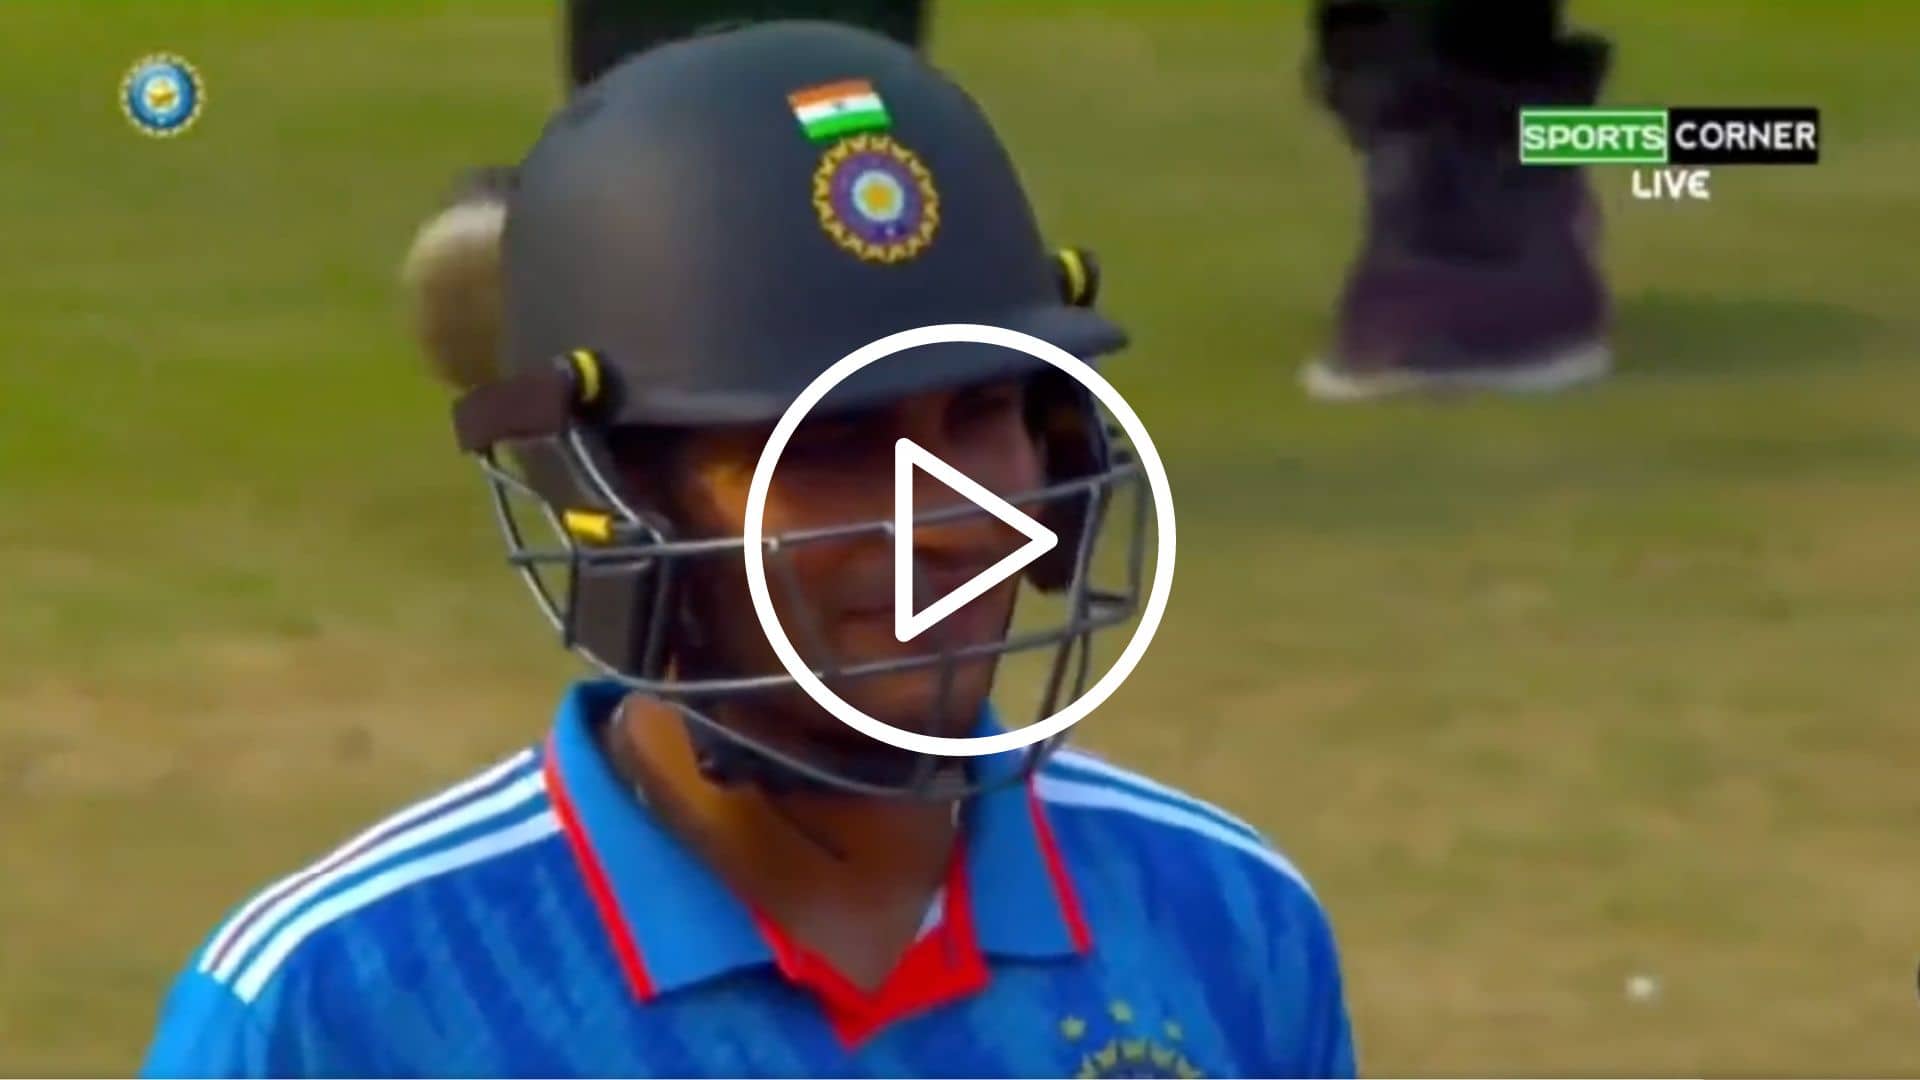 [Watch] Shubman Gill Reacts To KL Rahul's Gigantic Six Outside Stadium In Indore